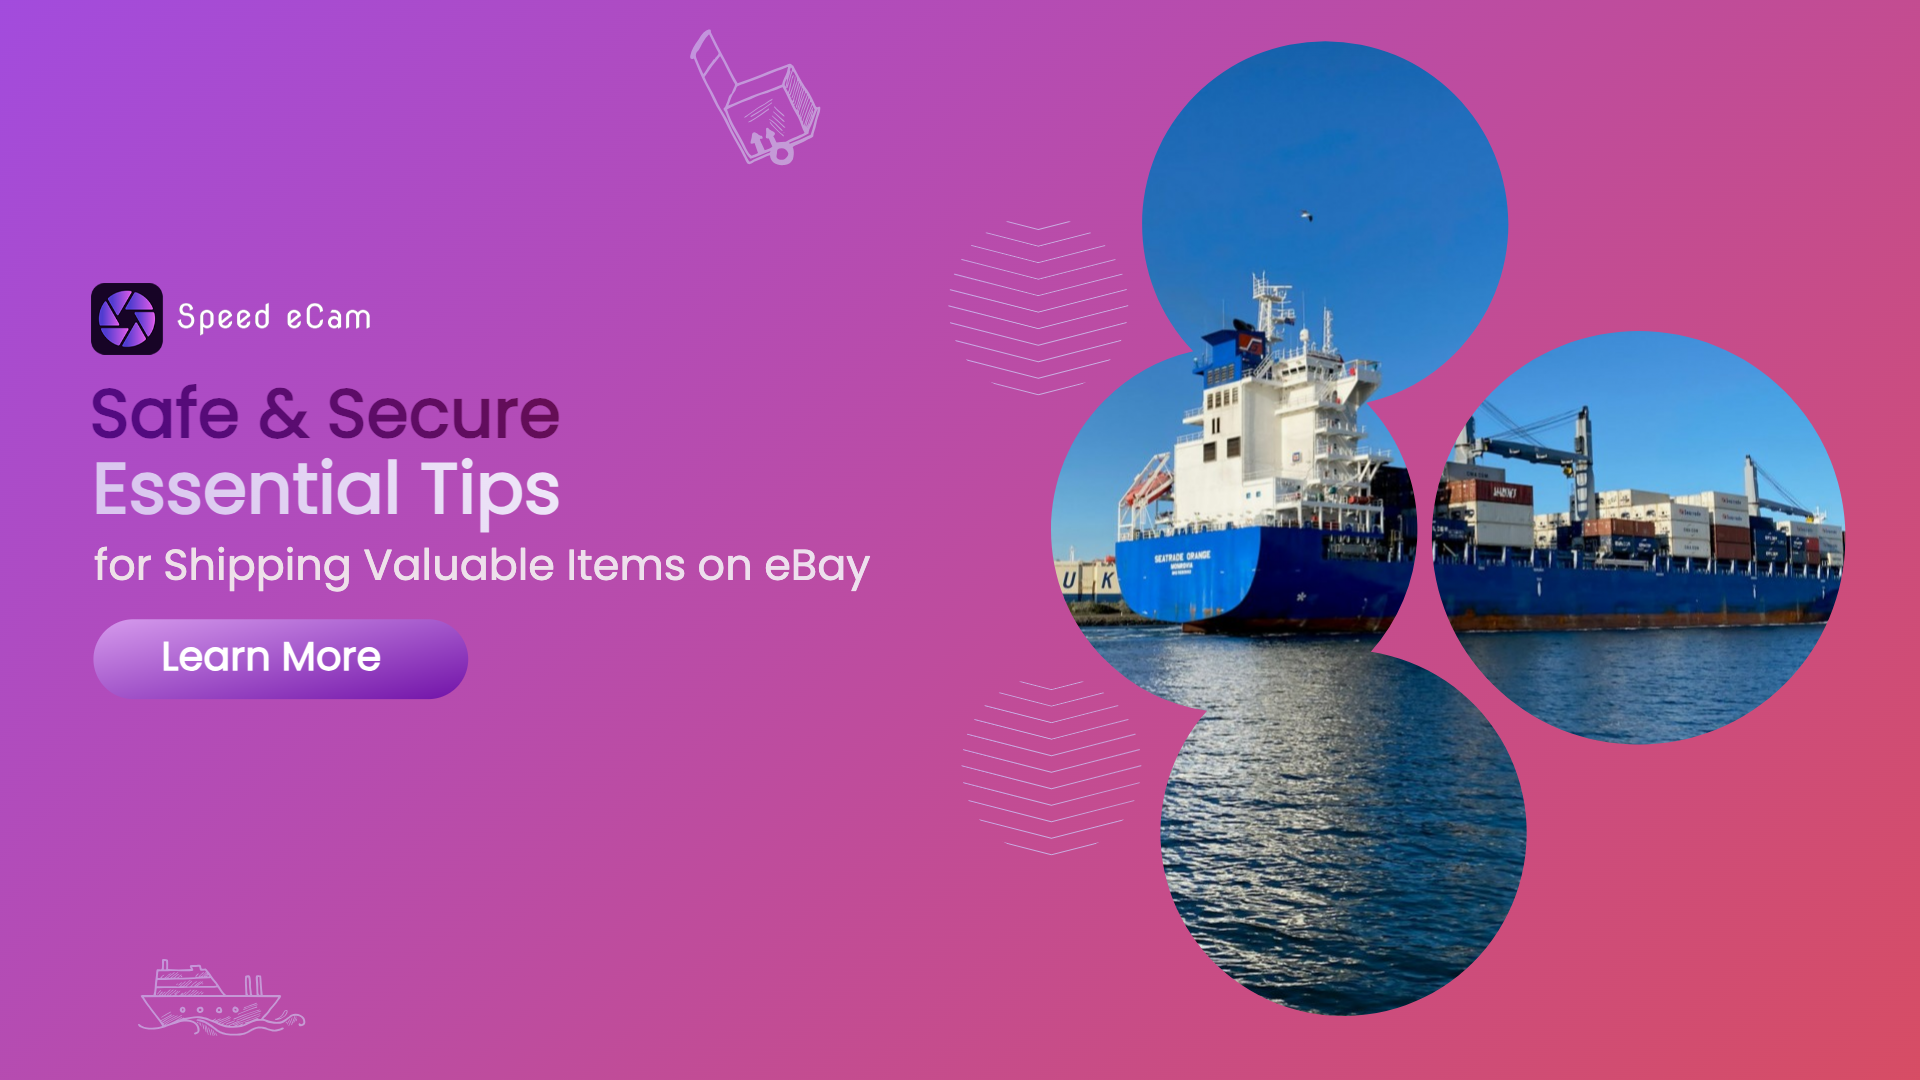 Safe & Secure: Essential Tips for Shipping Valuable Items on eBay